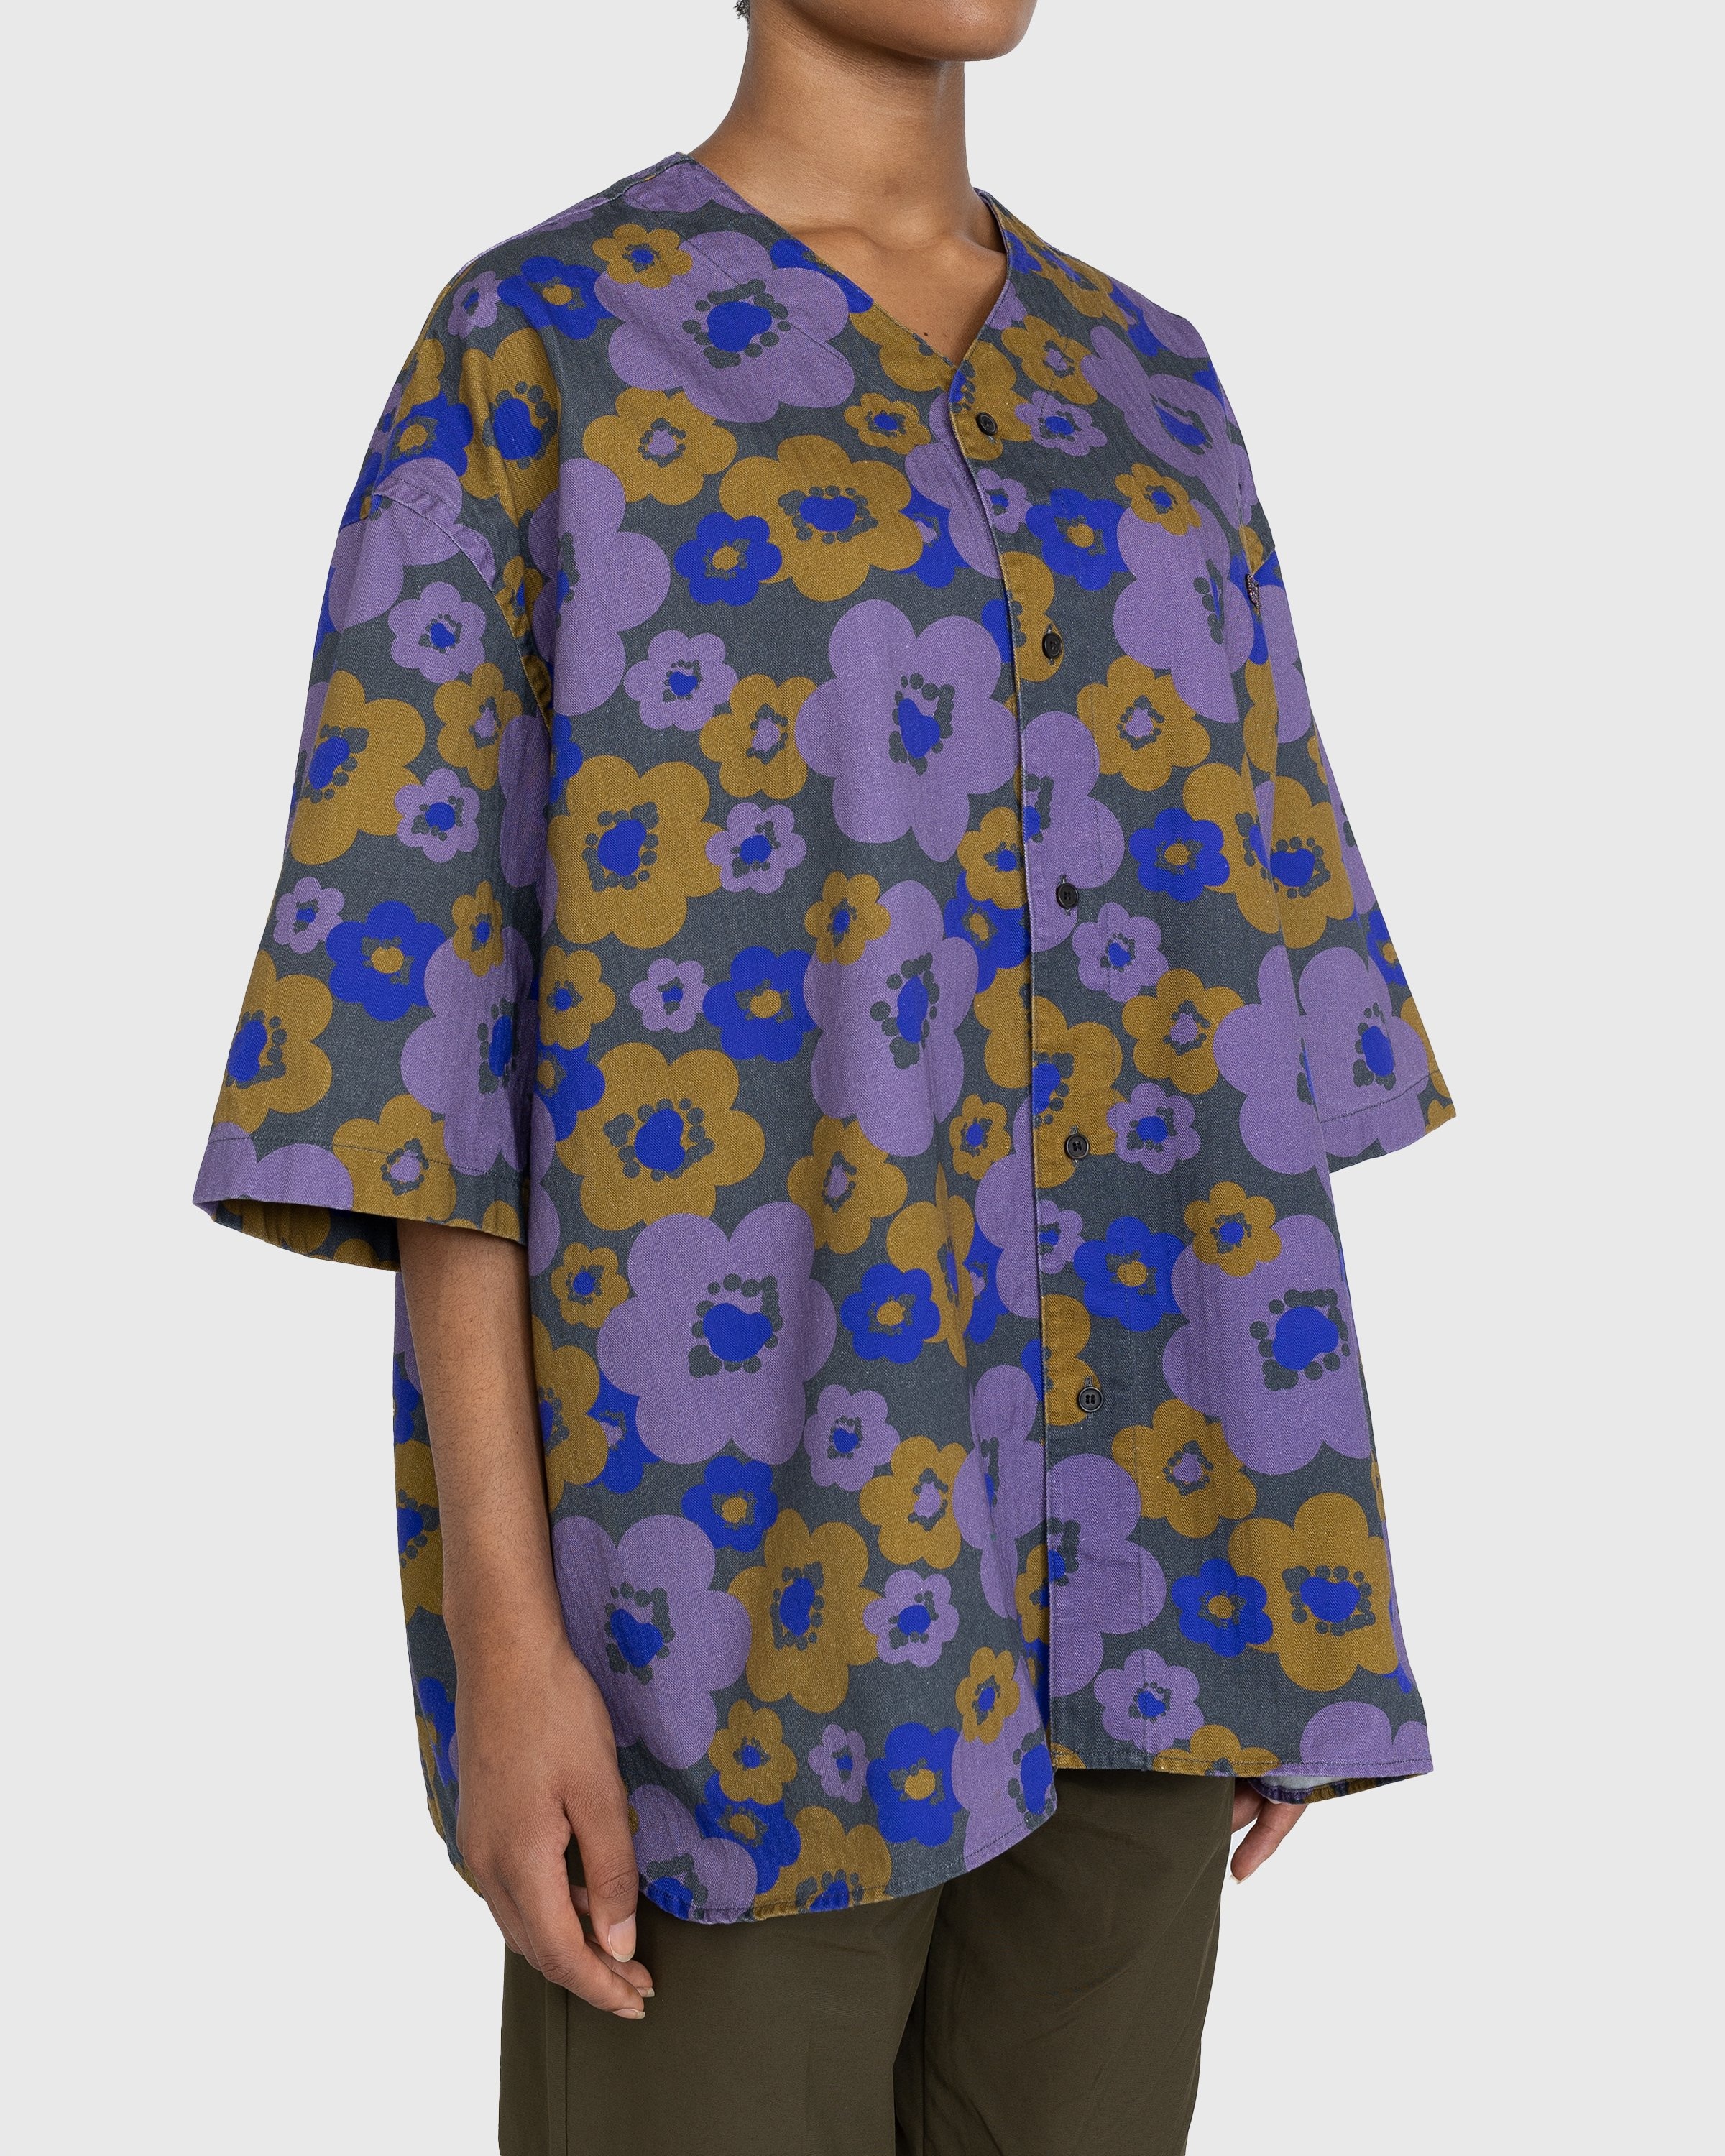 Acne Studios – Floral Short-Sleeve Button-Up Purple/Brown - Shortsleeve Shirts - Multi - Image 3